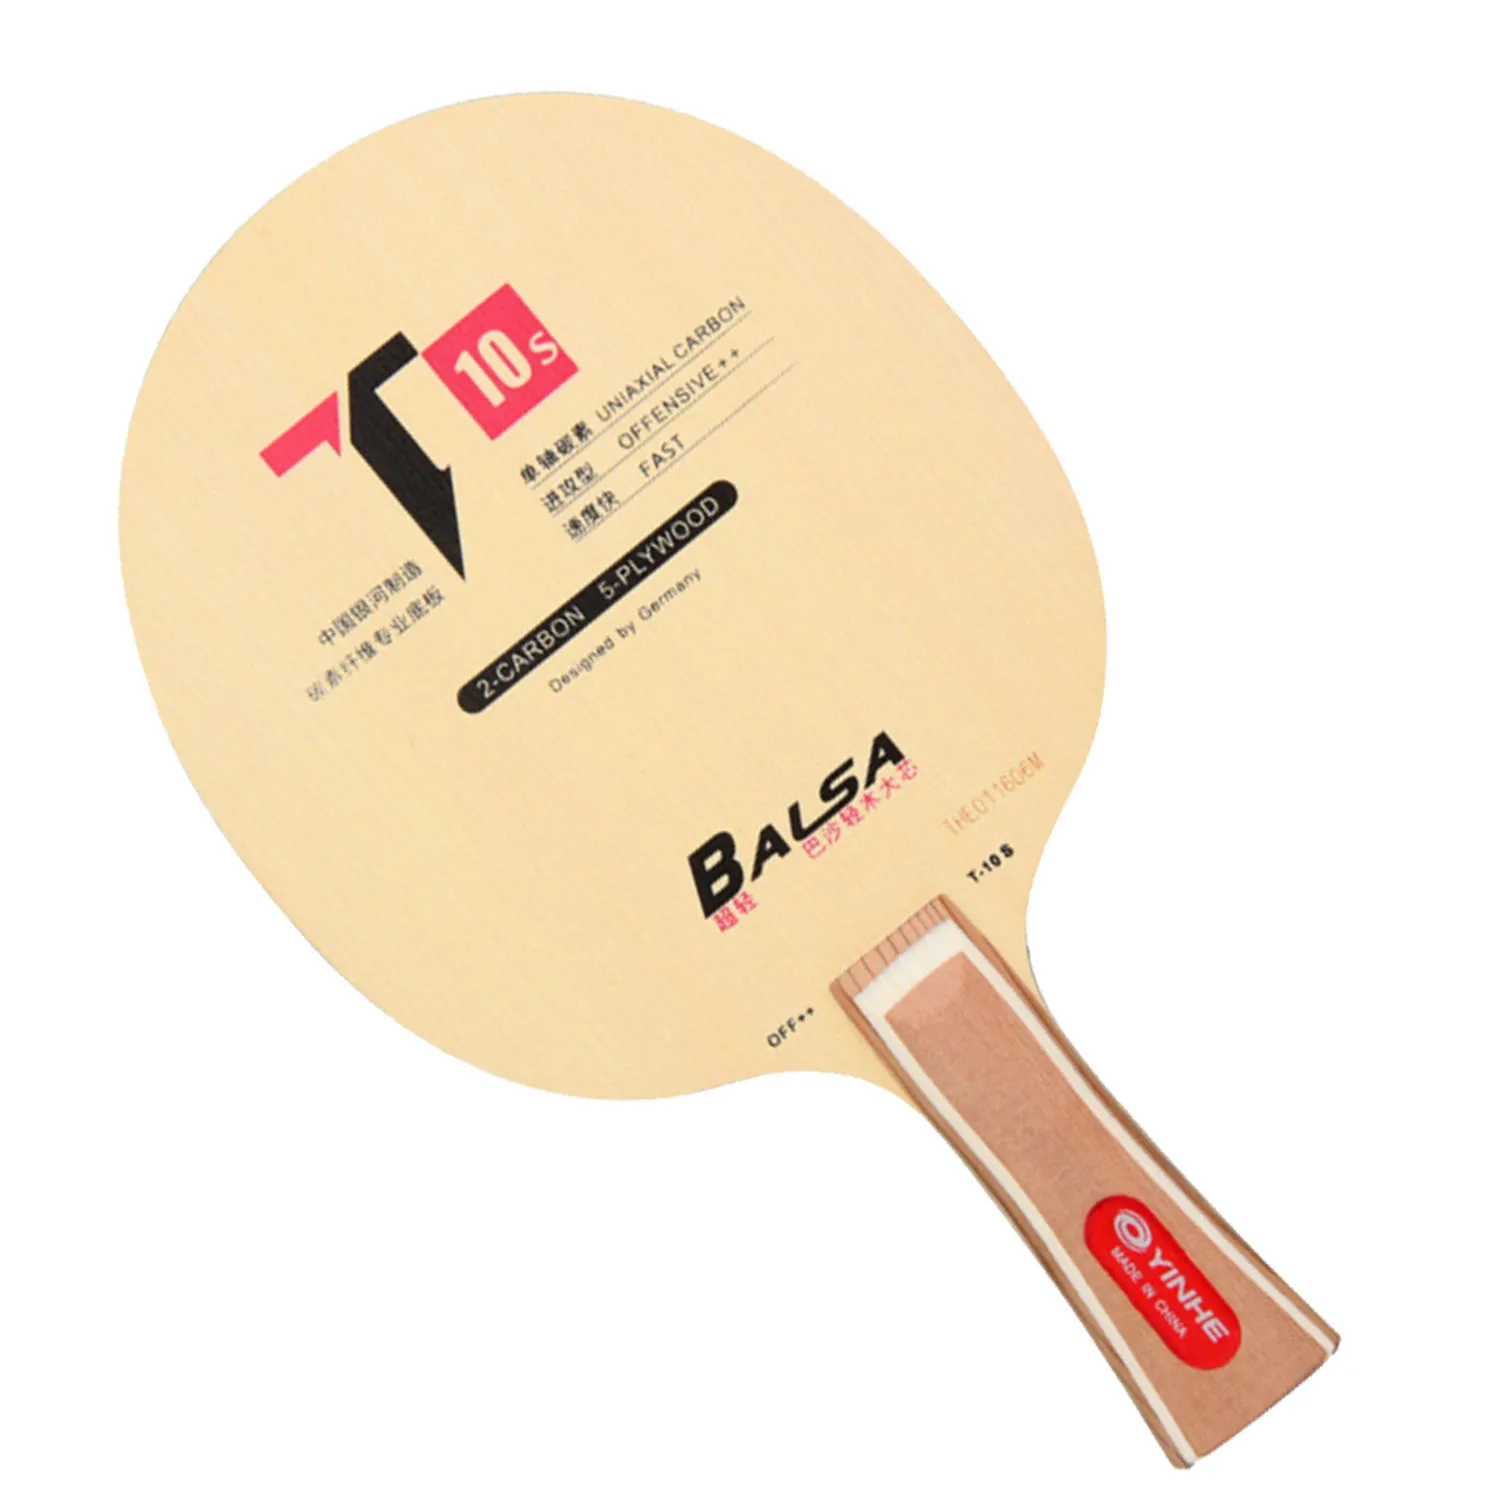 Original Yinhe T-10S T10S table tennis blade very light fast attack with loop table tennis rackets ping pong paddles racquet